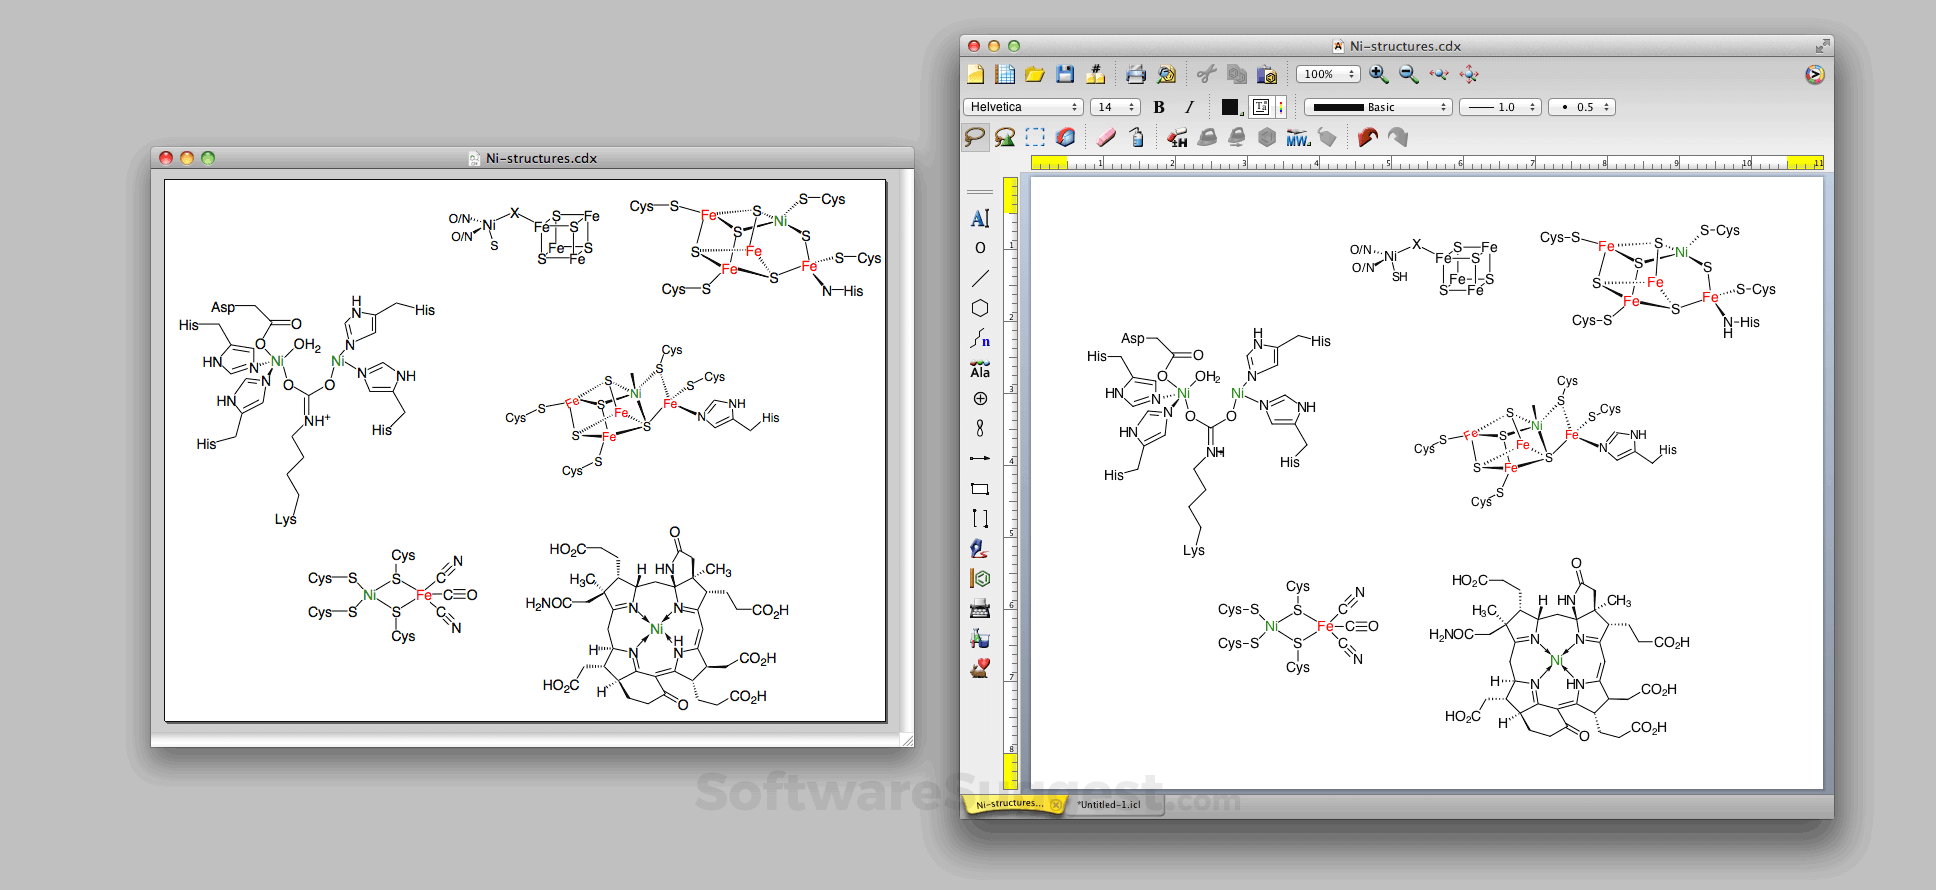 chemdoodle login